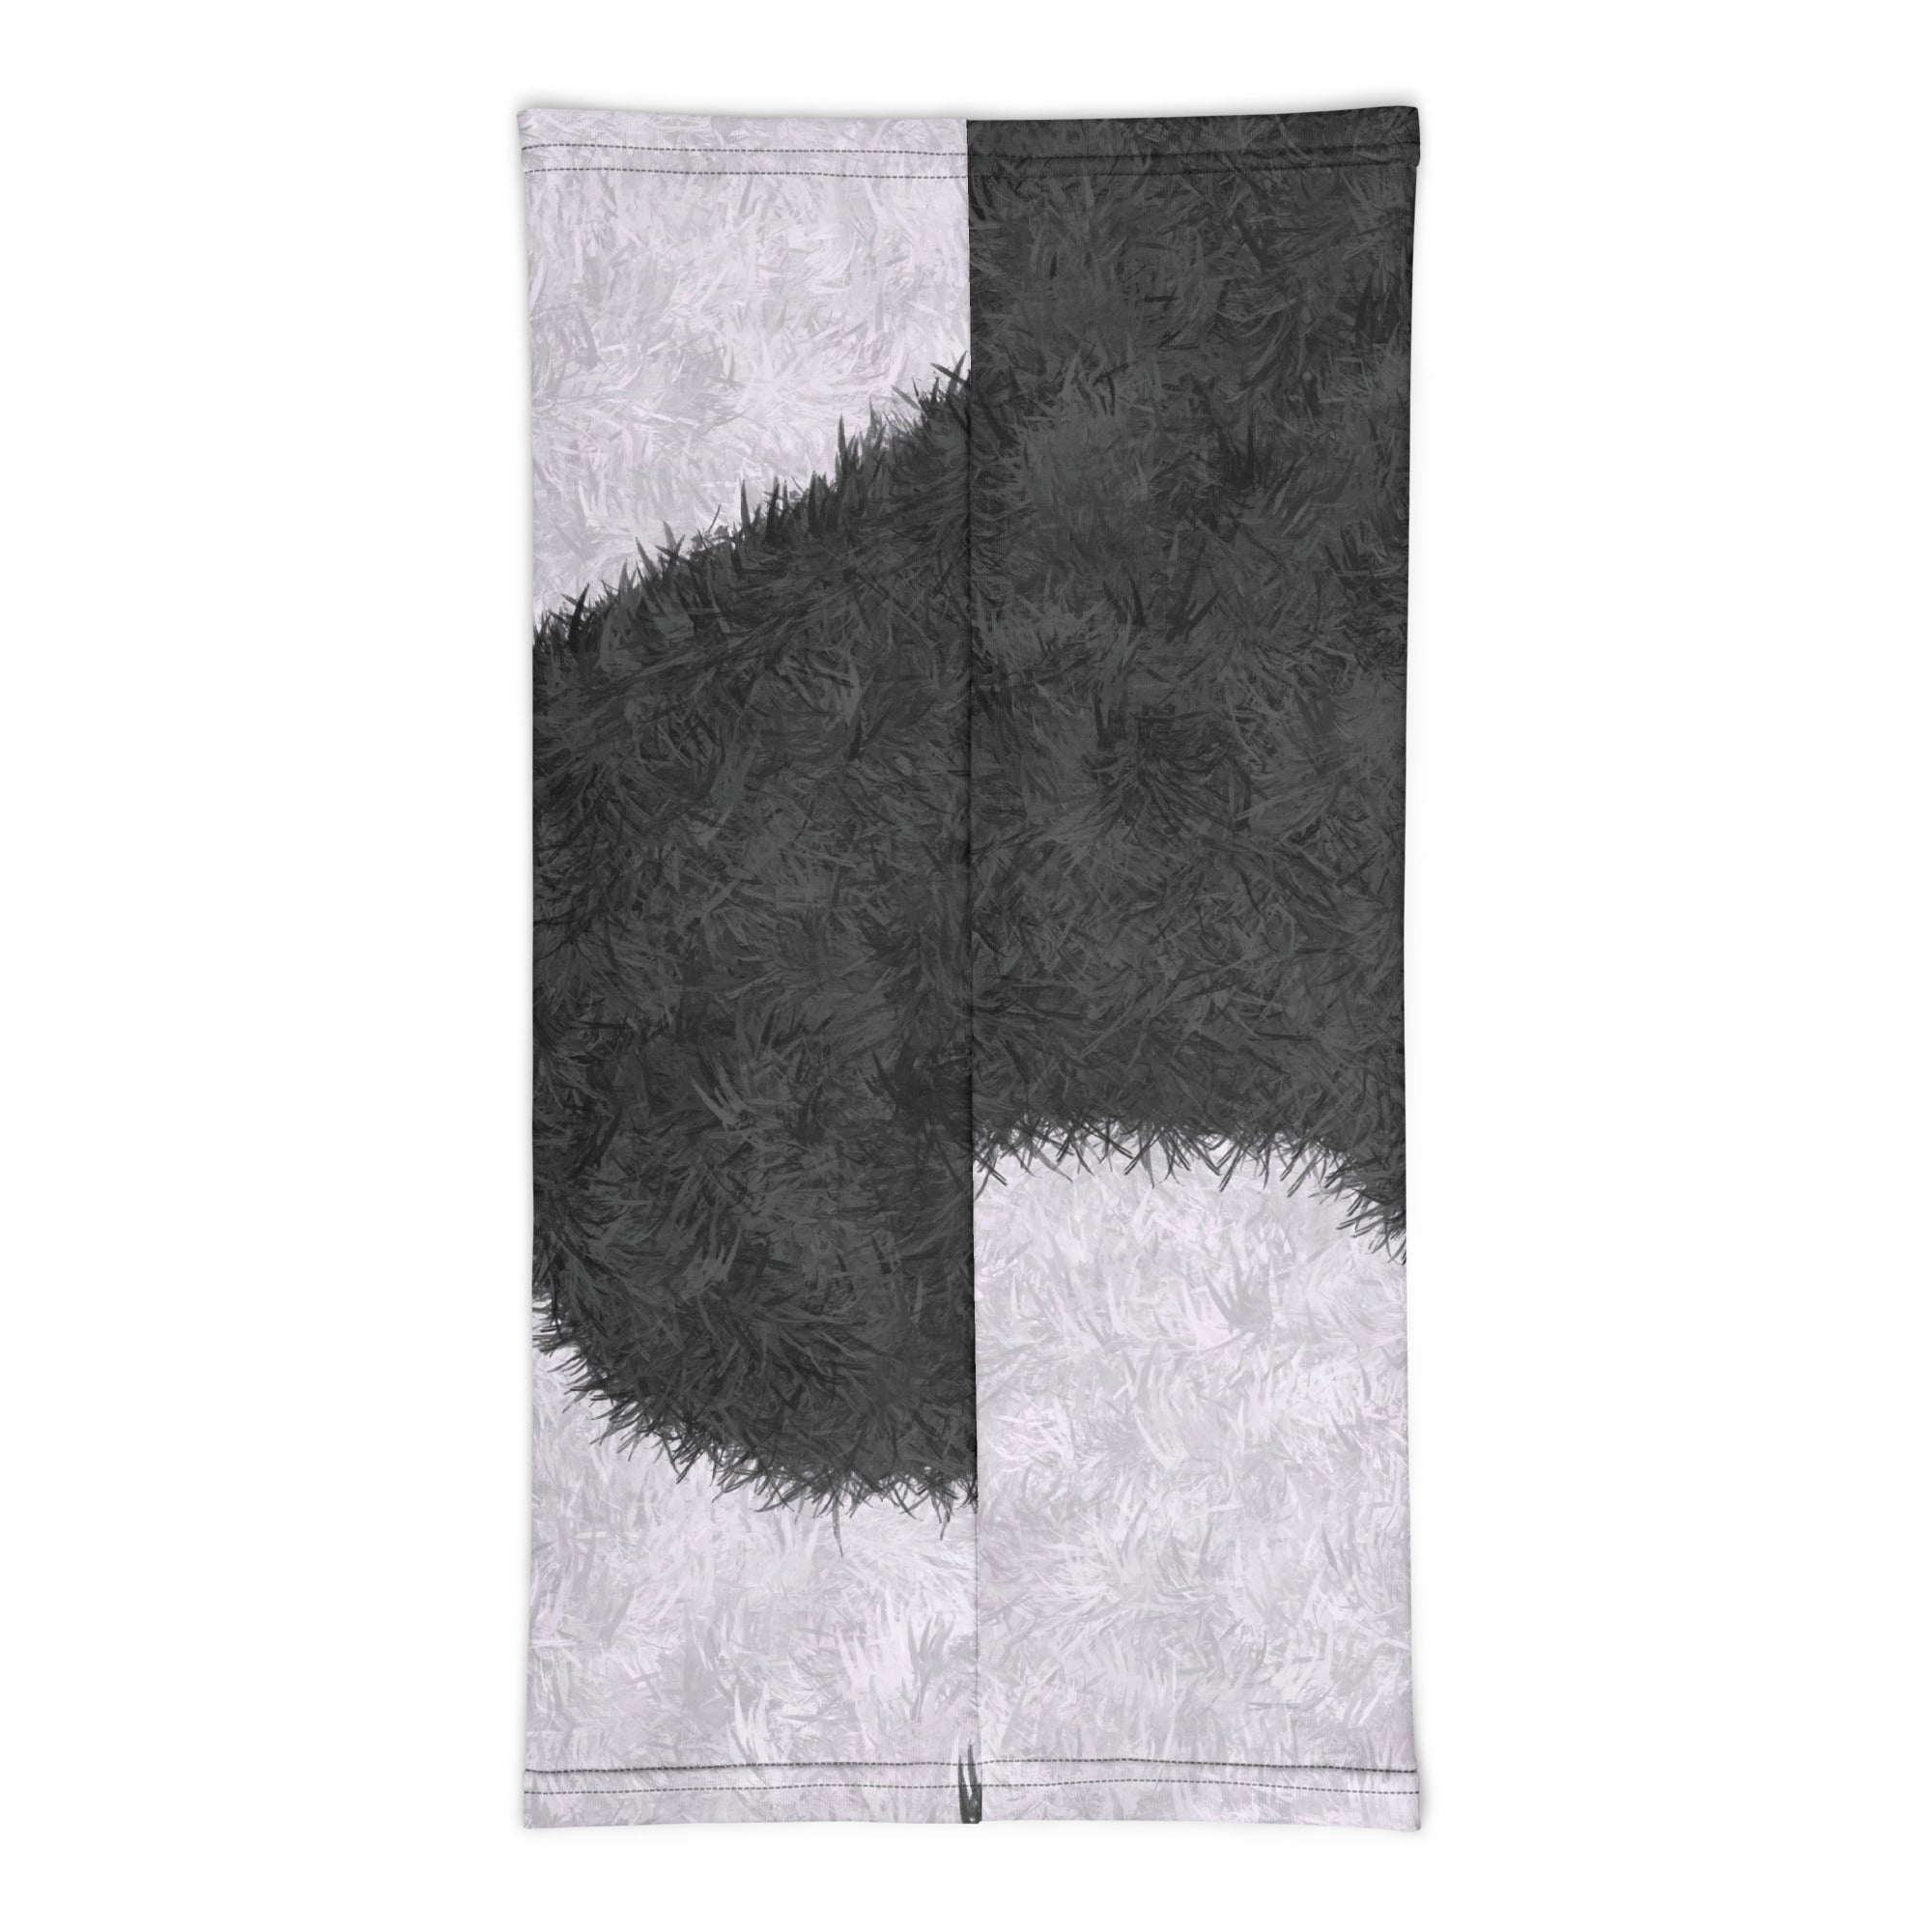 Black and White Cow Face Print Neck Gaiter